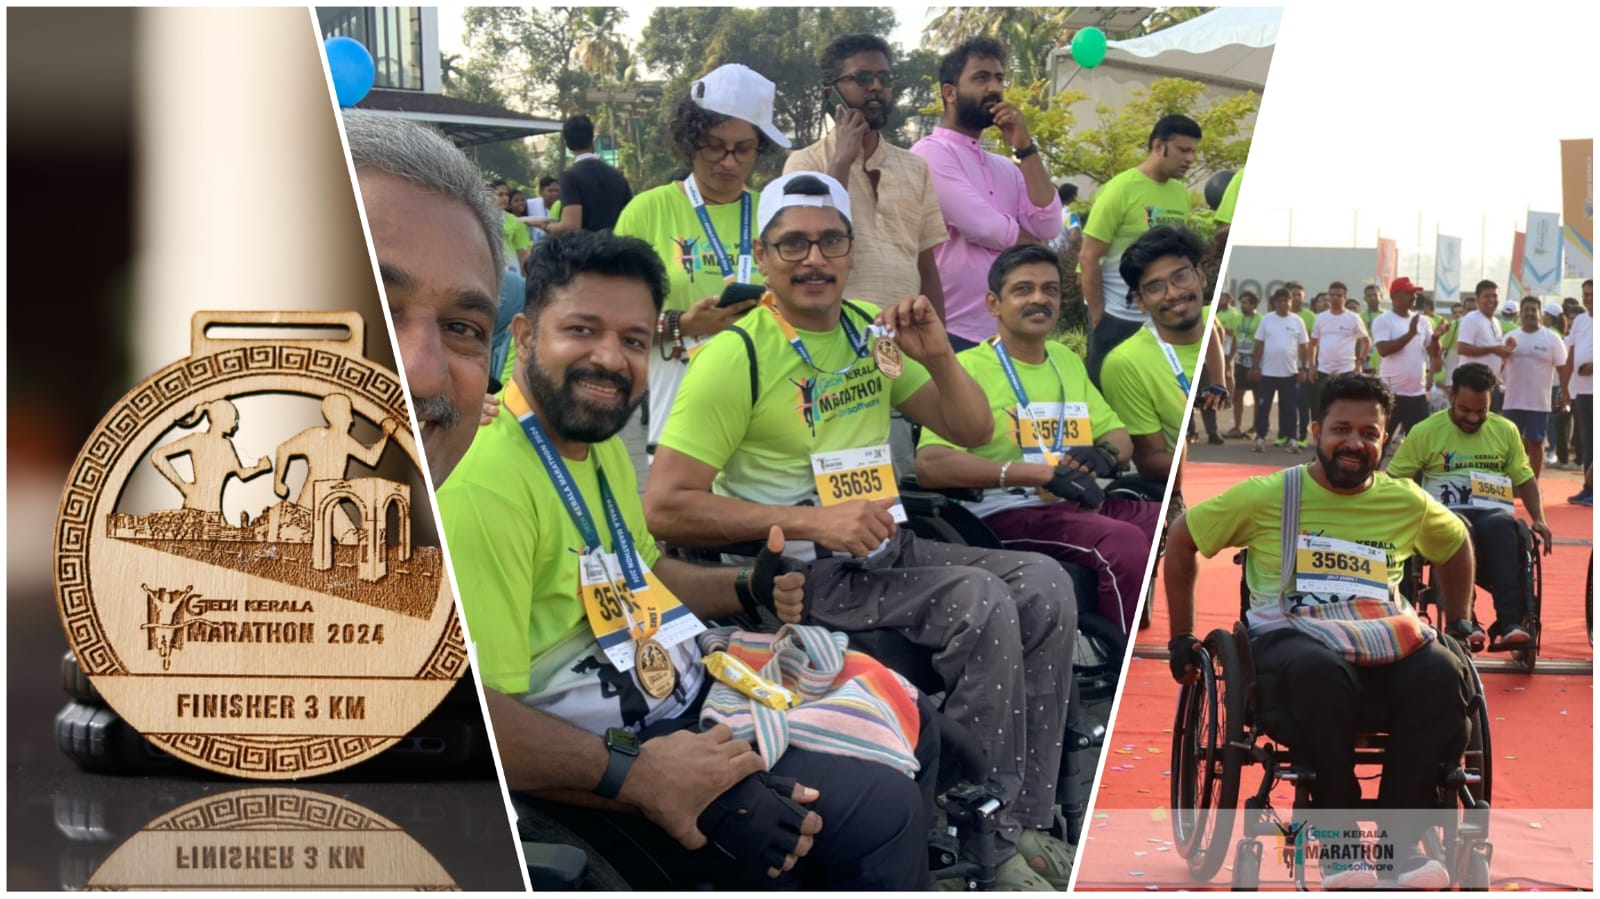 Meet Jolly Joseph who carved the medals for marathon at Infopark - LIFESTYLE TODAY NEWS